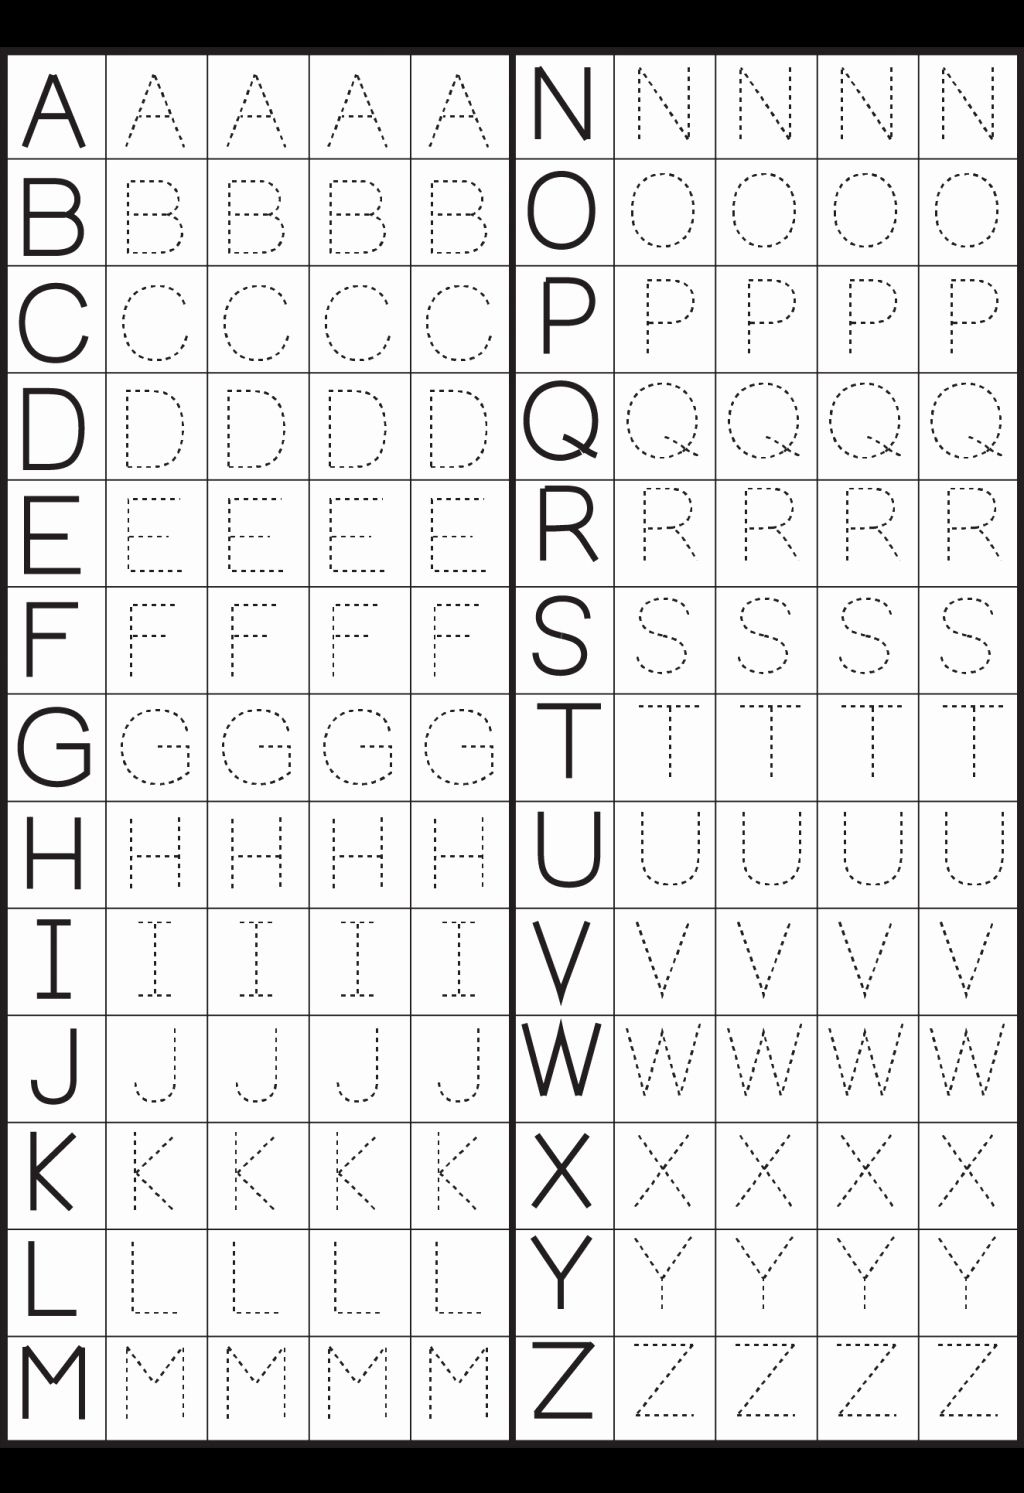 Colouring Alphabet Exercises Pdf | Letter Tracing Worksheets pertaining to Alphabet Letters Tracing Exercises